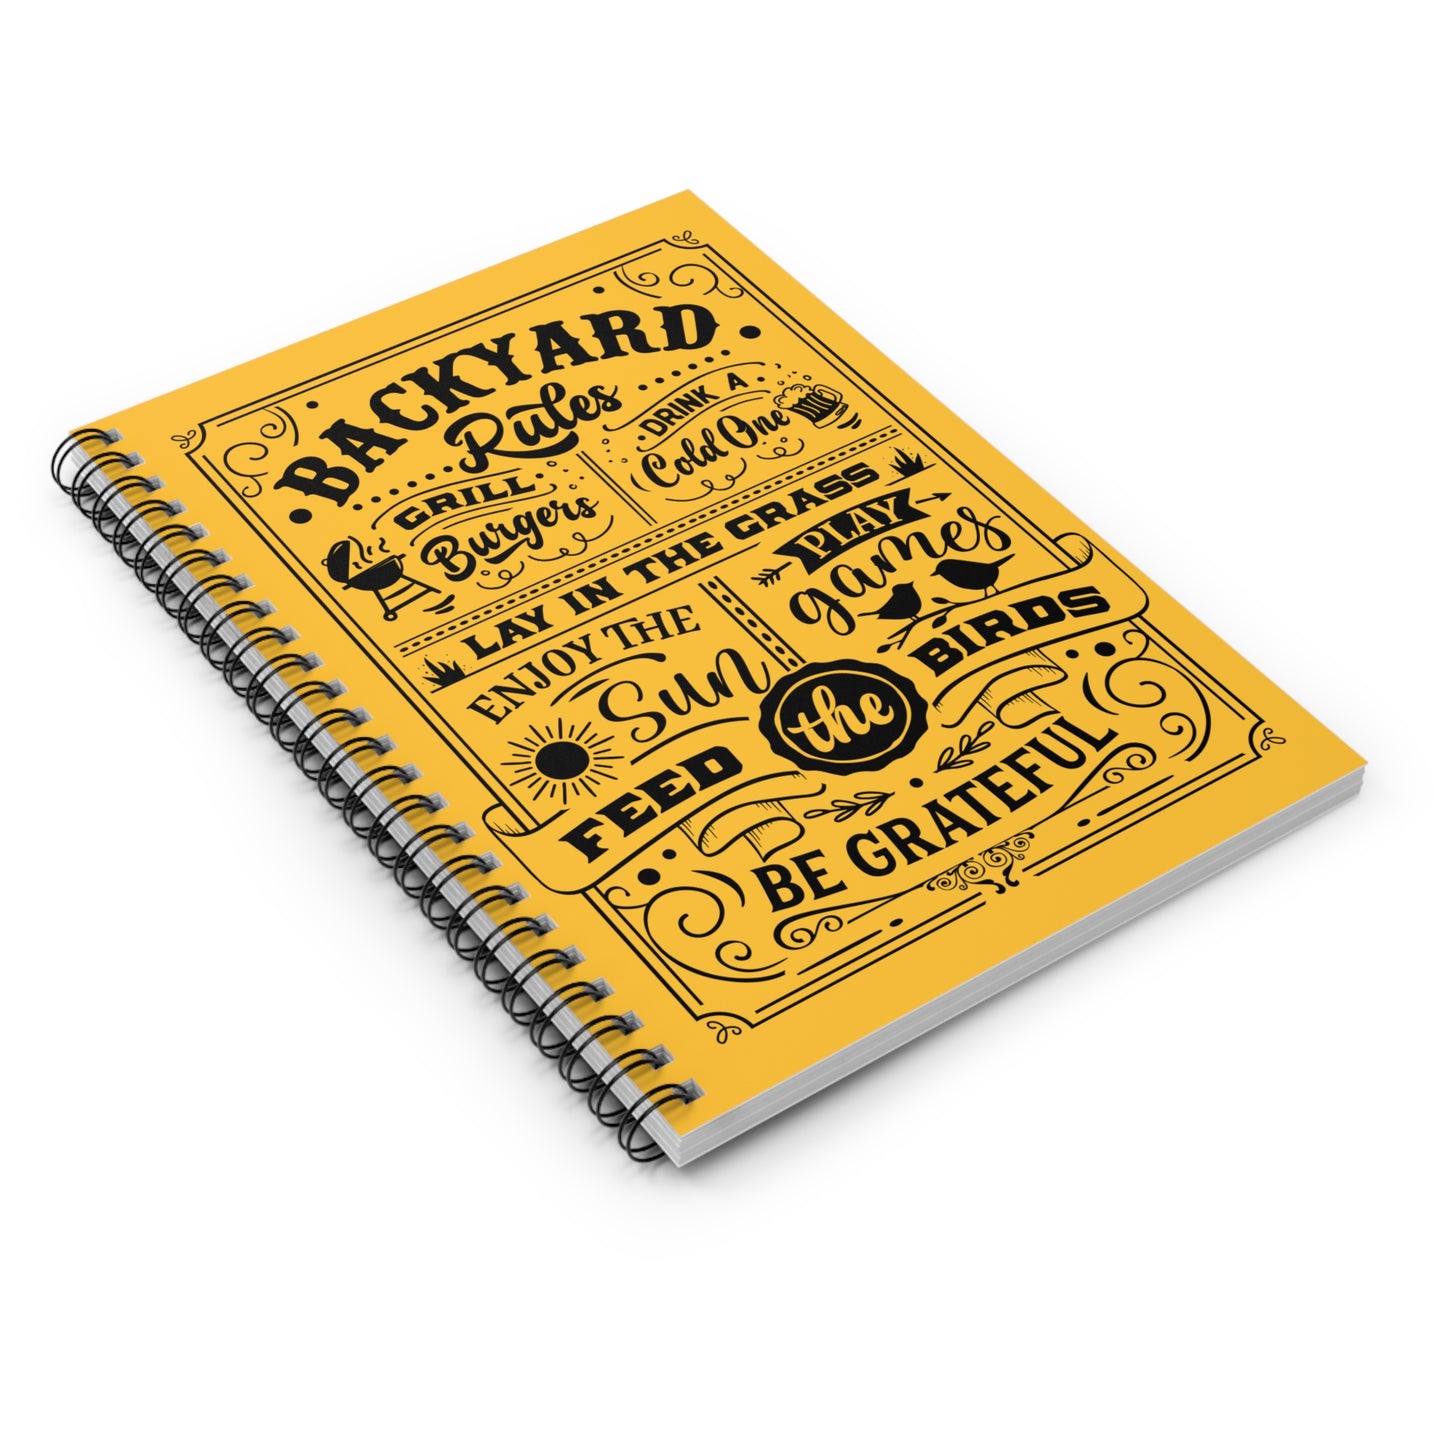 Backyard Rules: Spiral Notebook - Log Books - Journals - Diaries - and More Custom Printed by TheGlassyLass